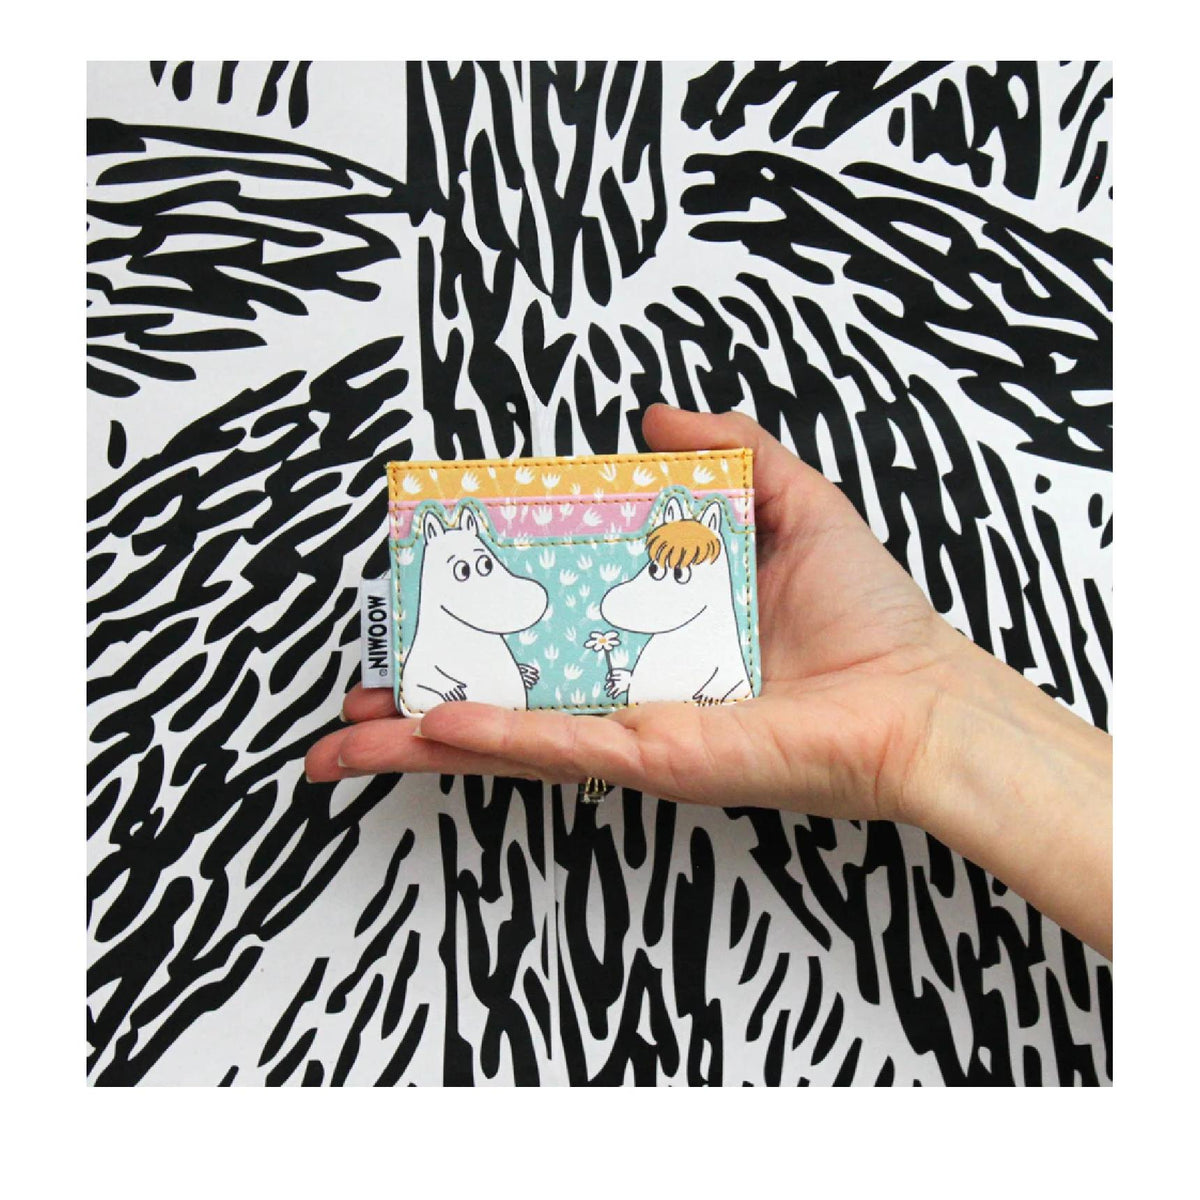 Mummi Card Holder Floral - House of Disaster